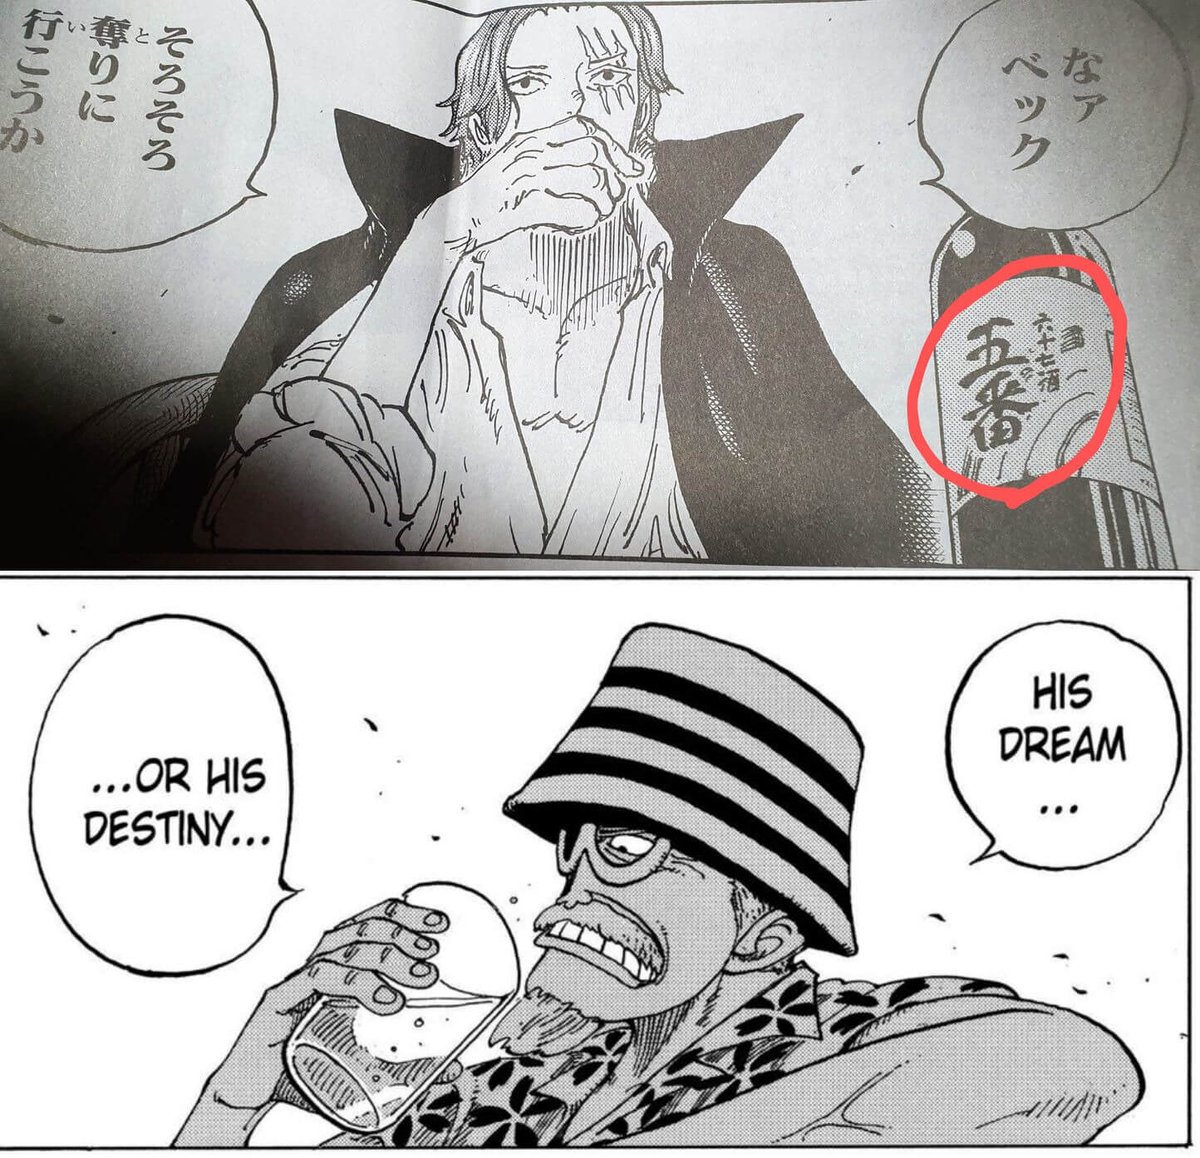 Label of the liquor next to Shanks says, 'Number 5, 67' in Japanese, which might be inspired from 'Destiny' symphony No.5 Opus 67 by Beethoven. It may be Oda's answer to the question in chapter 96, 'His dream or his destiny?'🍺